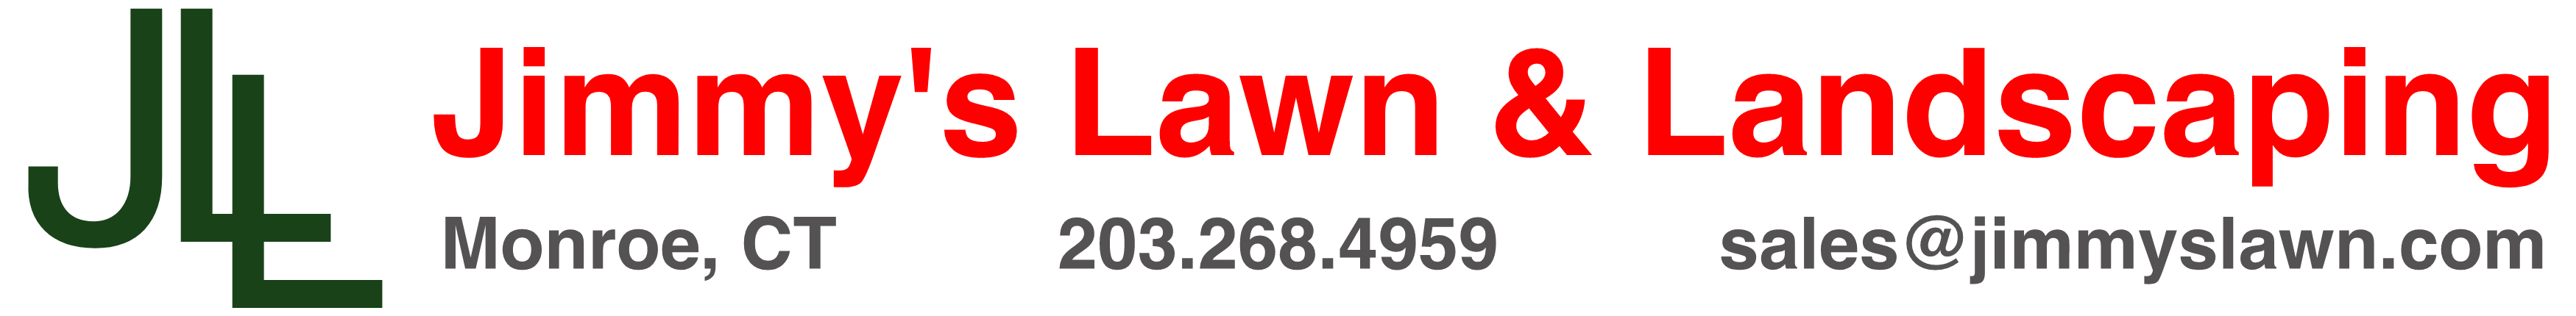 Jimmys Lawn & Landscaping